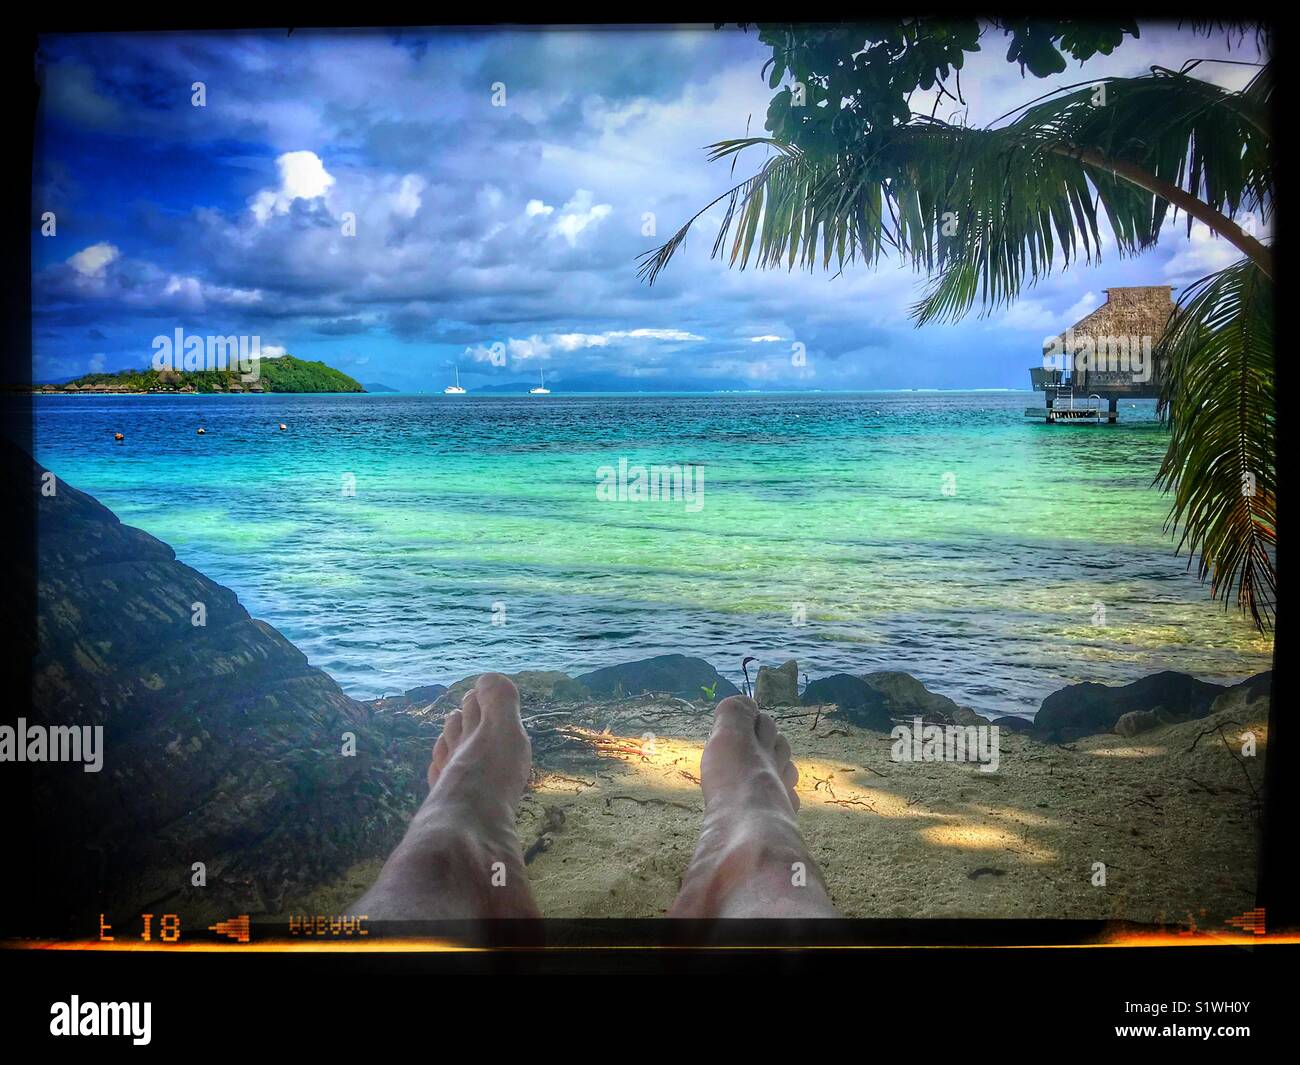 Sitting on the beach relaxing looking out at the water in Bora Bora, French Polynesia Stock Photo